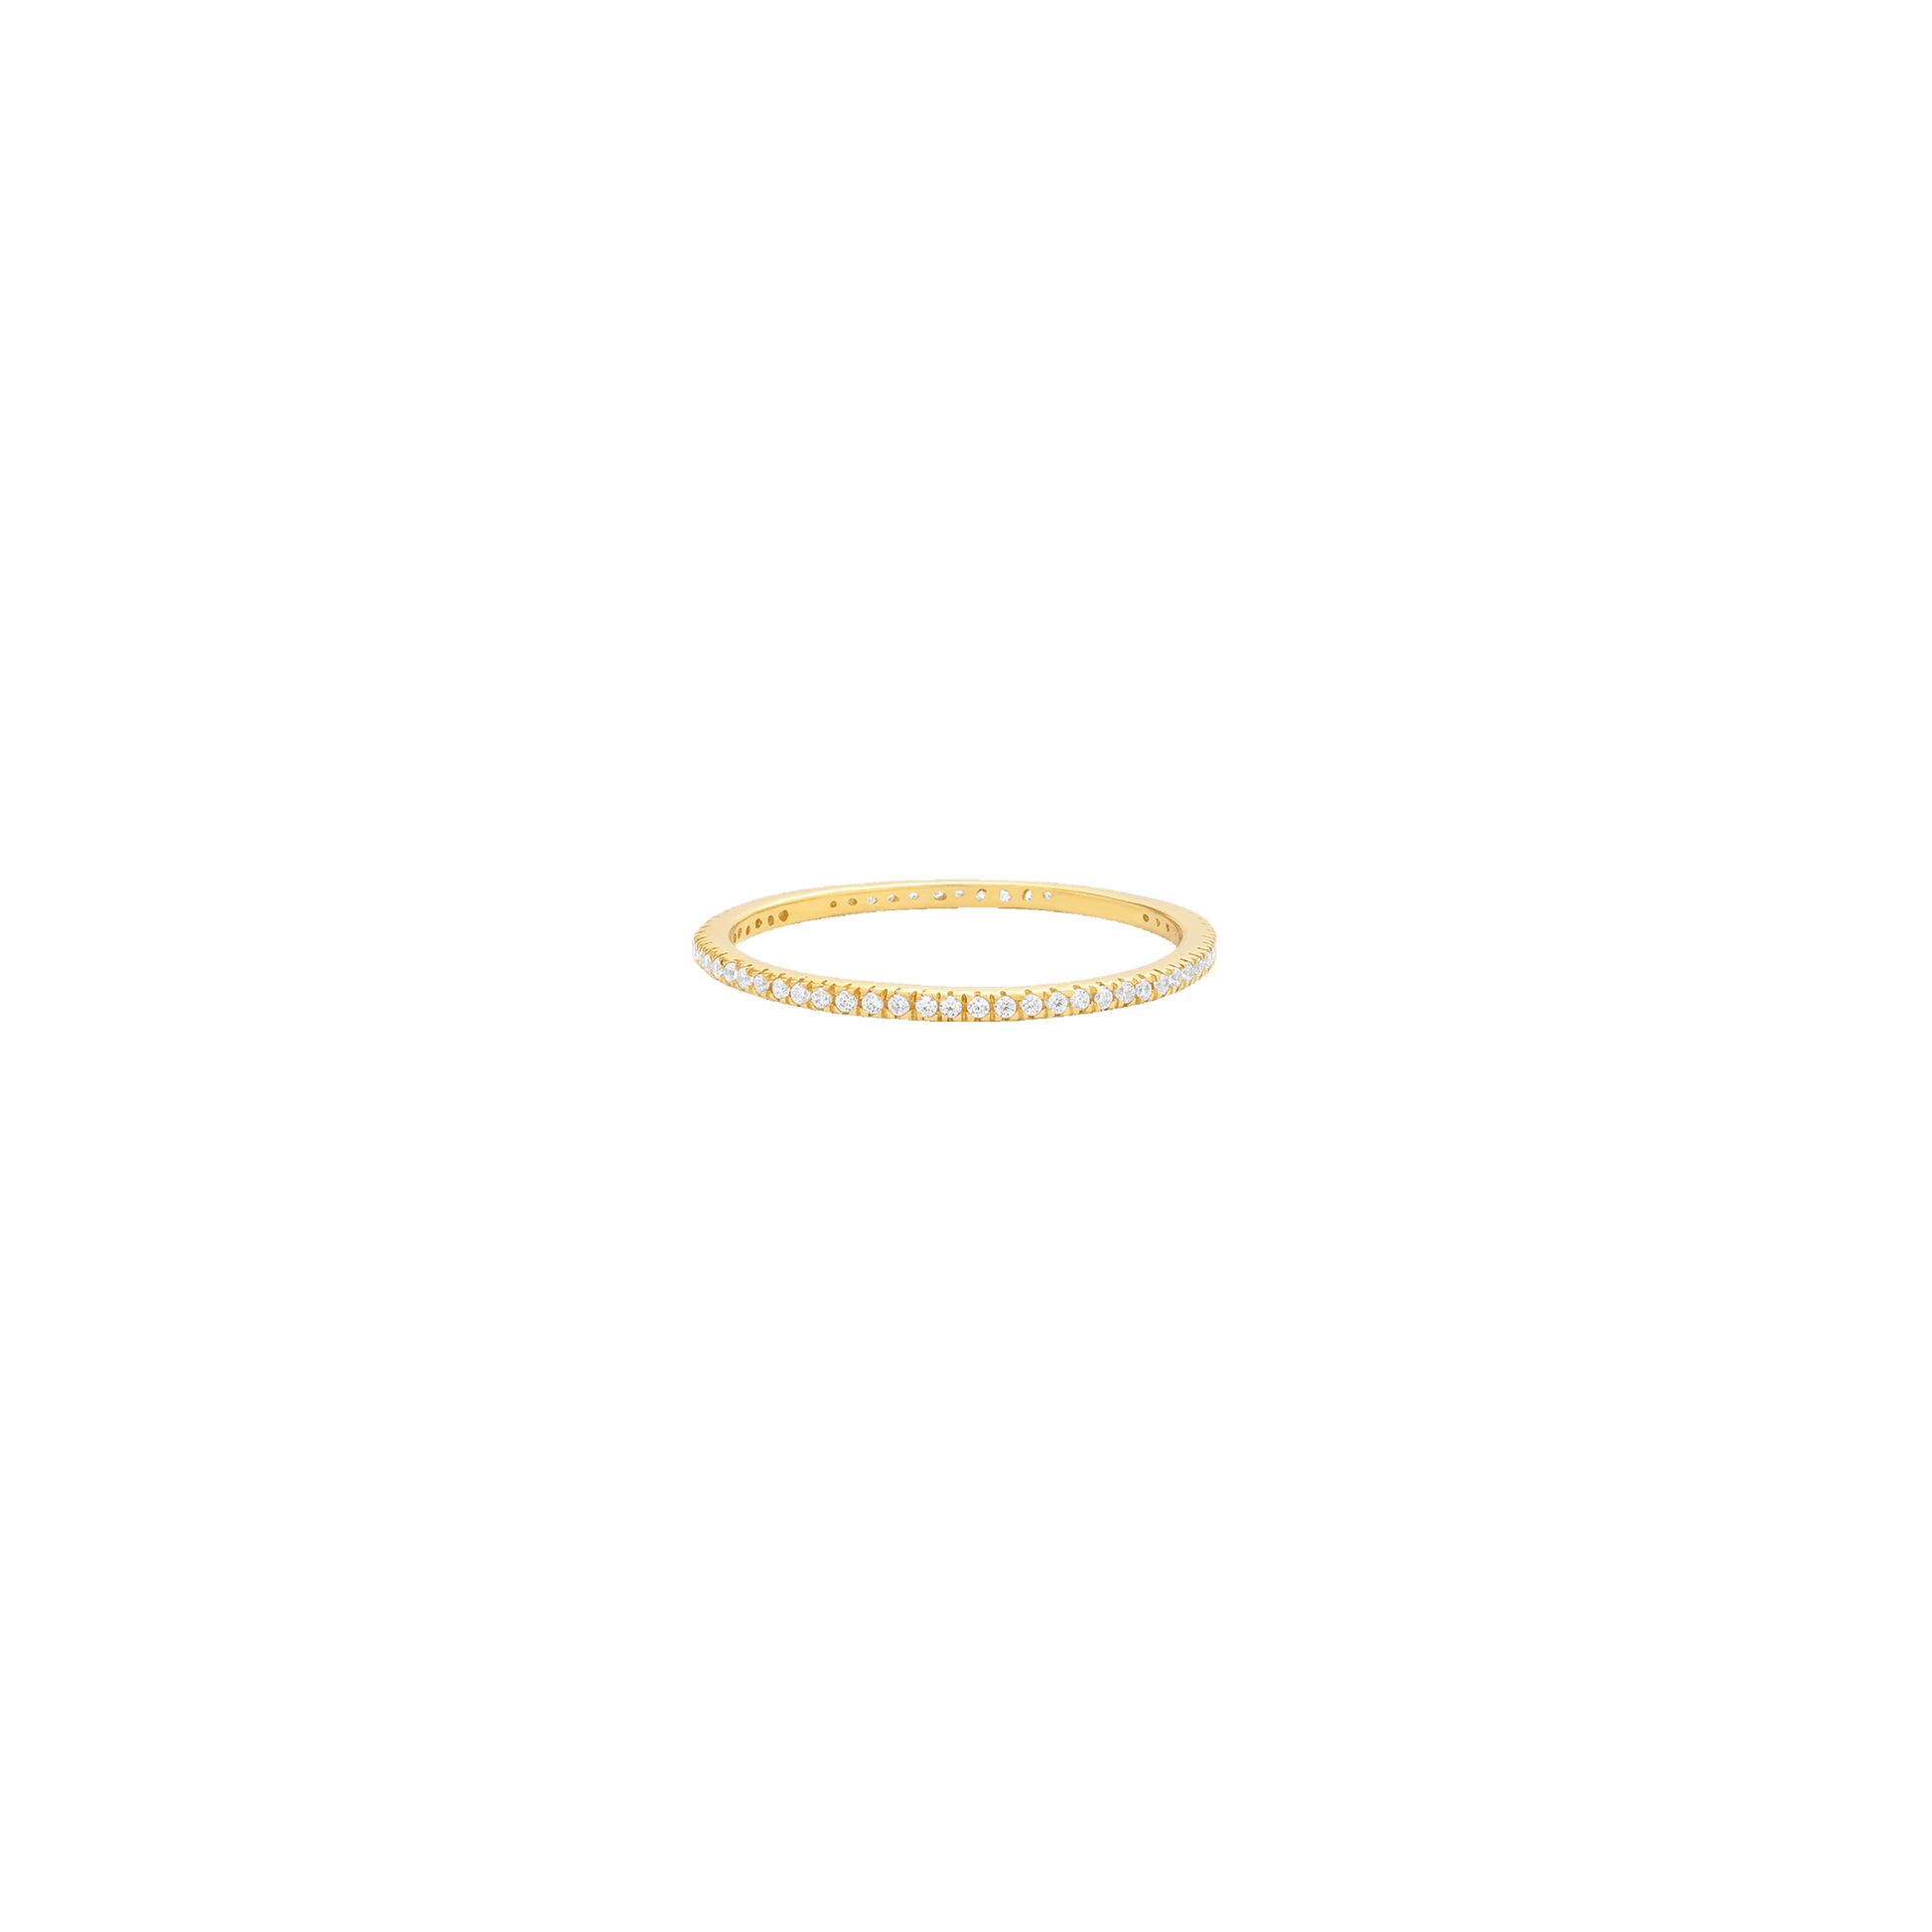 Diamond Eternity Ring - 14K Yellow Gold Rings 14K Solid Gold US 4 